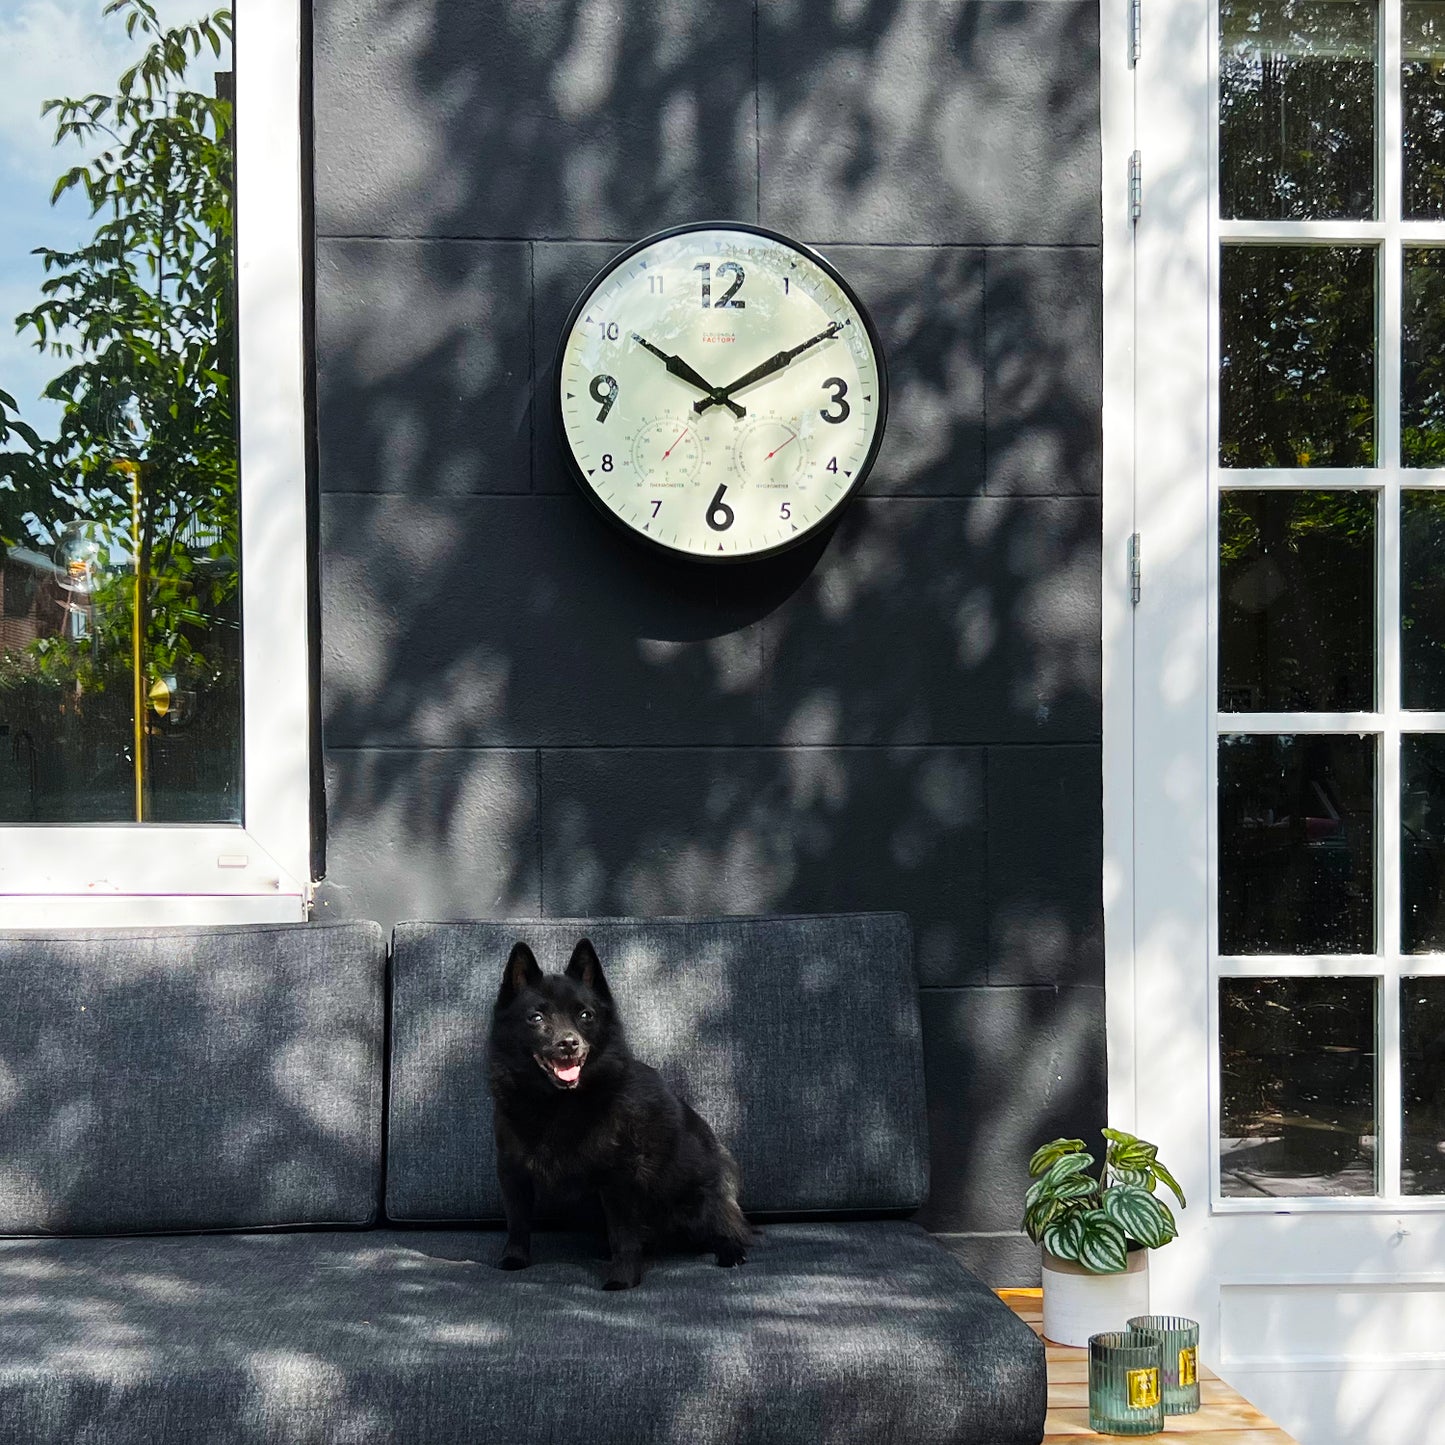 Factory Outdoor XL Black Wall Clock - Expansive Weather Station with Barometer & Temperature